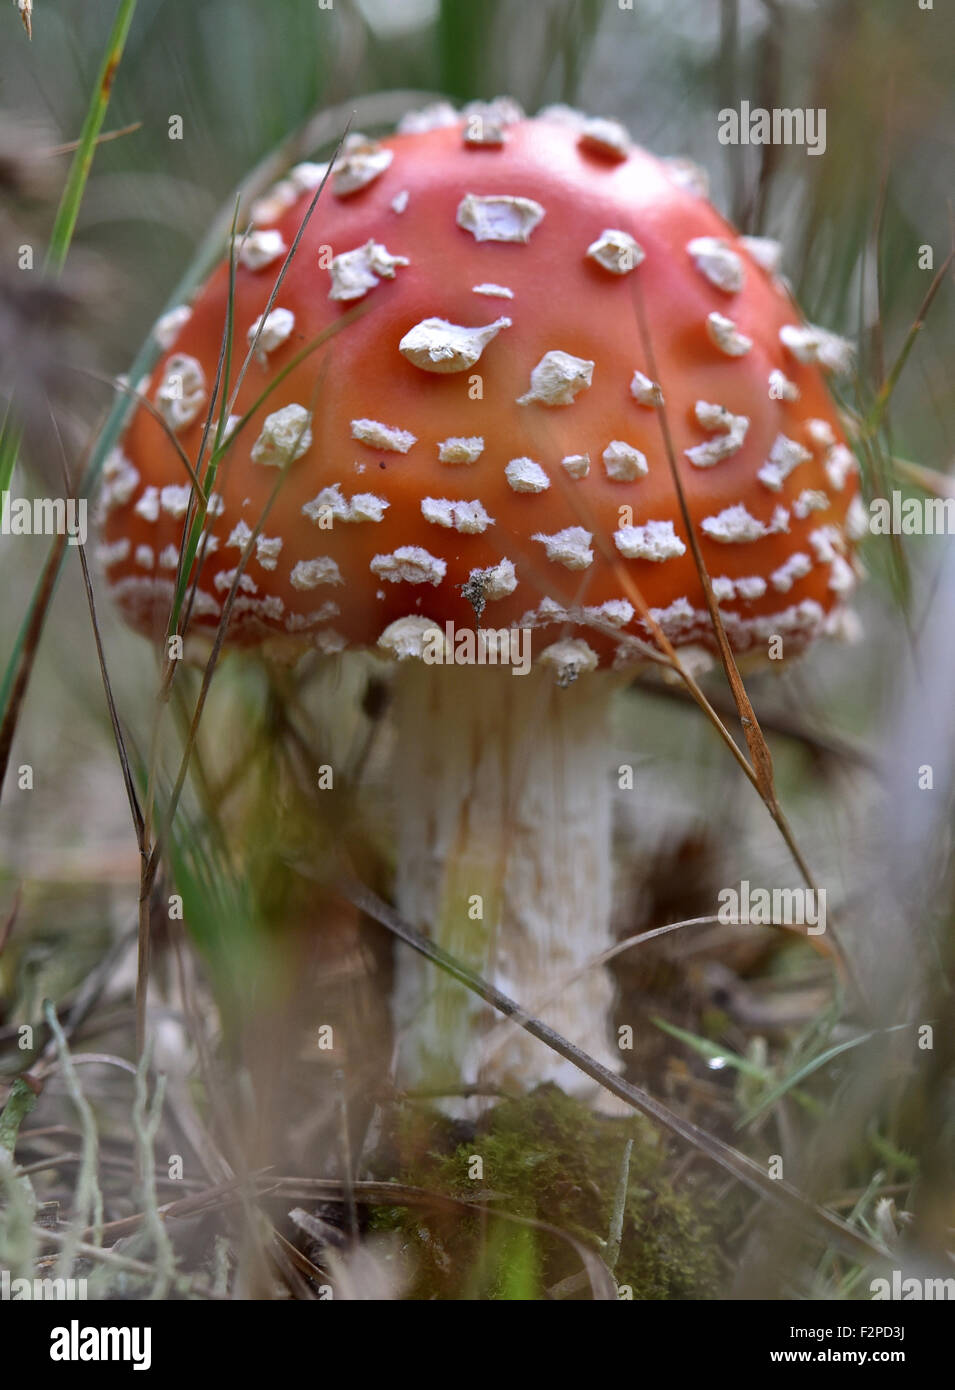 Fahrland, Germany. 21st Sep, 2015. A poisonous fly agaric mushroom growing in a forest near Fahrland, Germany, 21 September 2015. Mushrooms begin to sprout in mild, damp weather. PHOTO: BERND SETTNIK/DPA/Alamy Live News Stock Photo